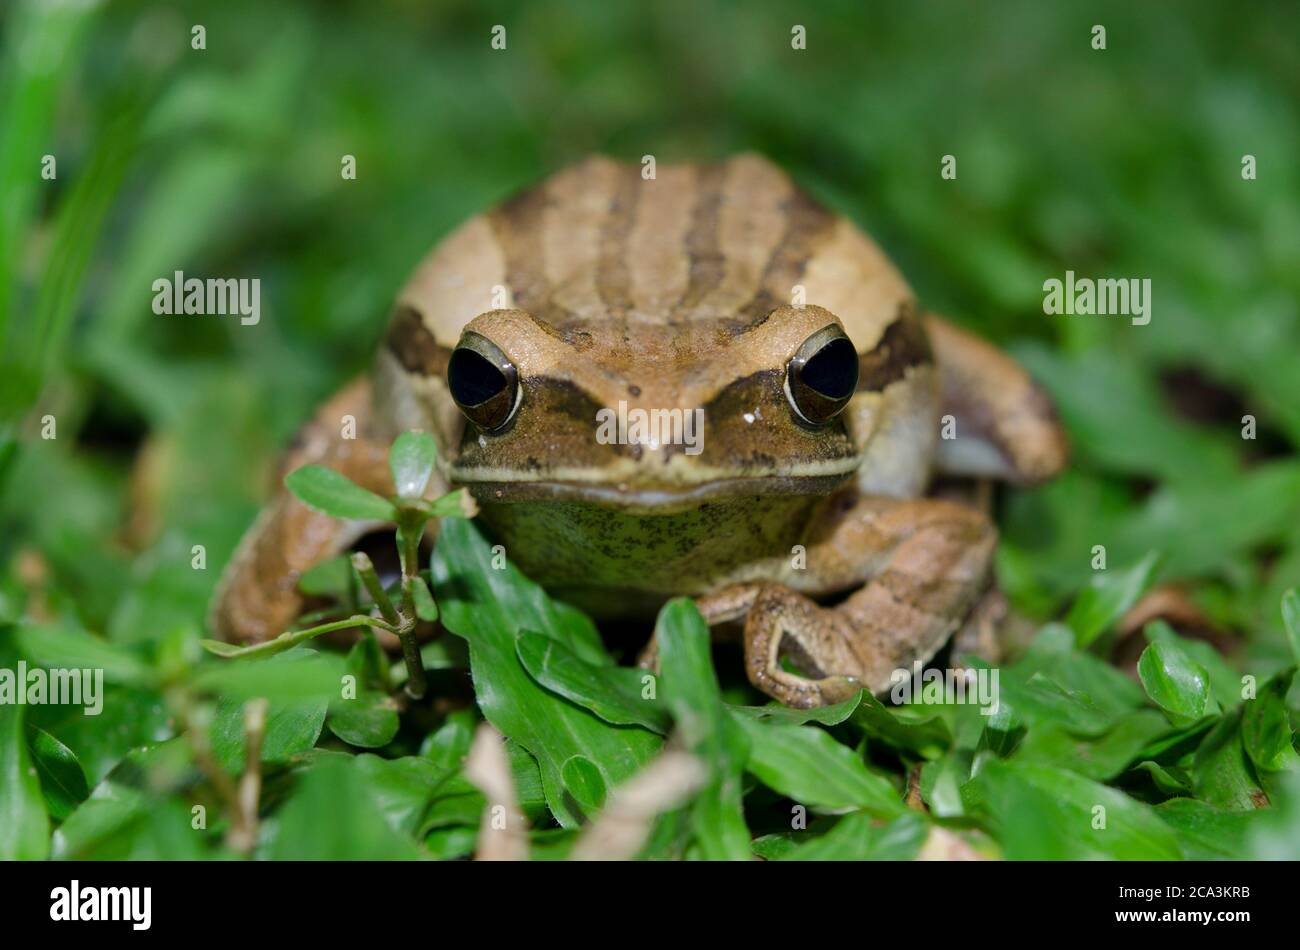 Four-lined Tree Frog (Polypedates leucomystax), Klungkung, Bali, Indonesia. Stock Photo